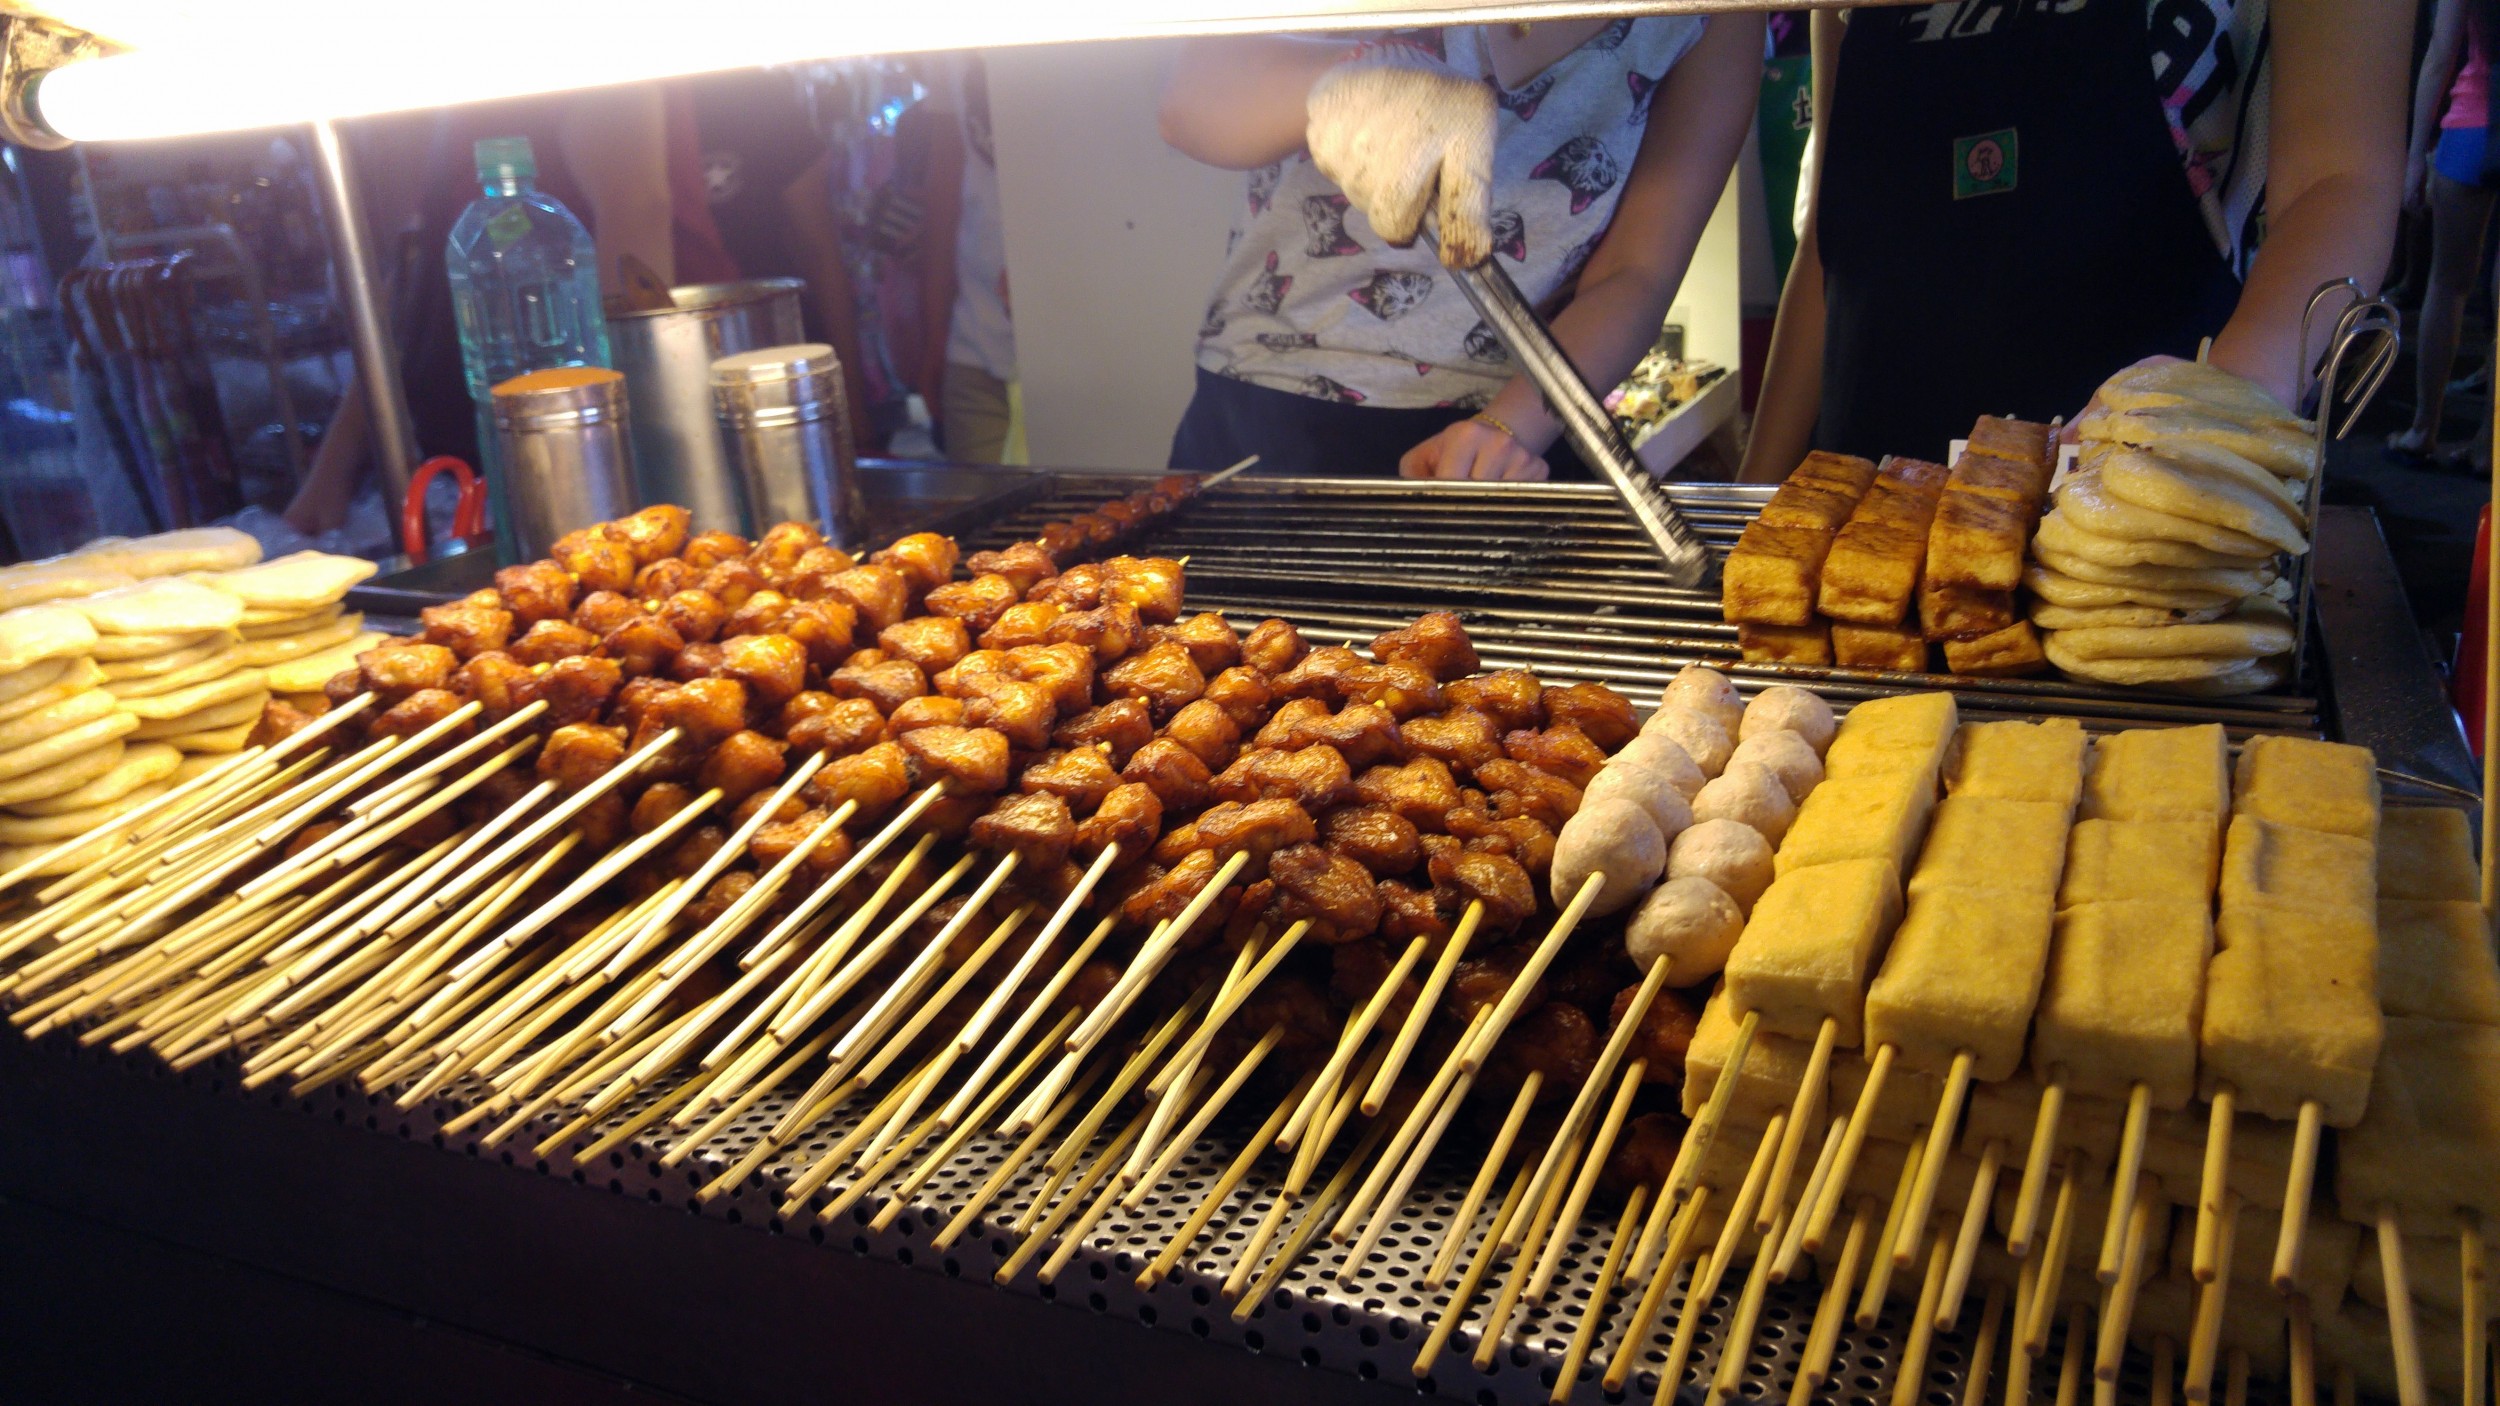 Nightmarket tour in Taipei | Visions of Travel